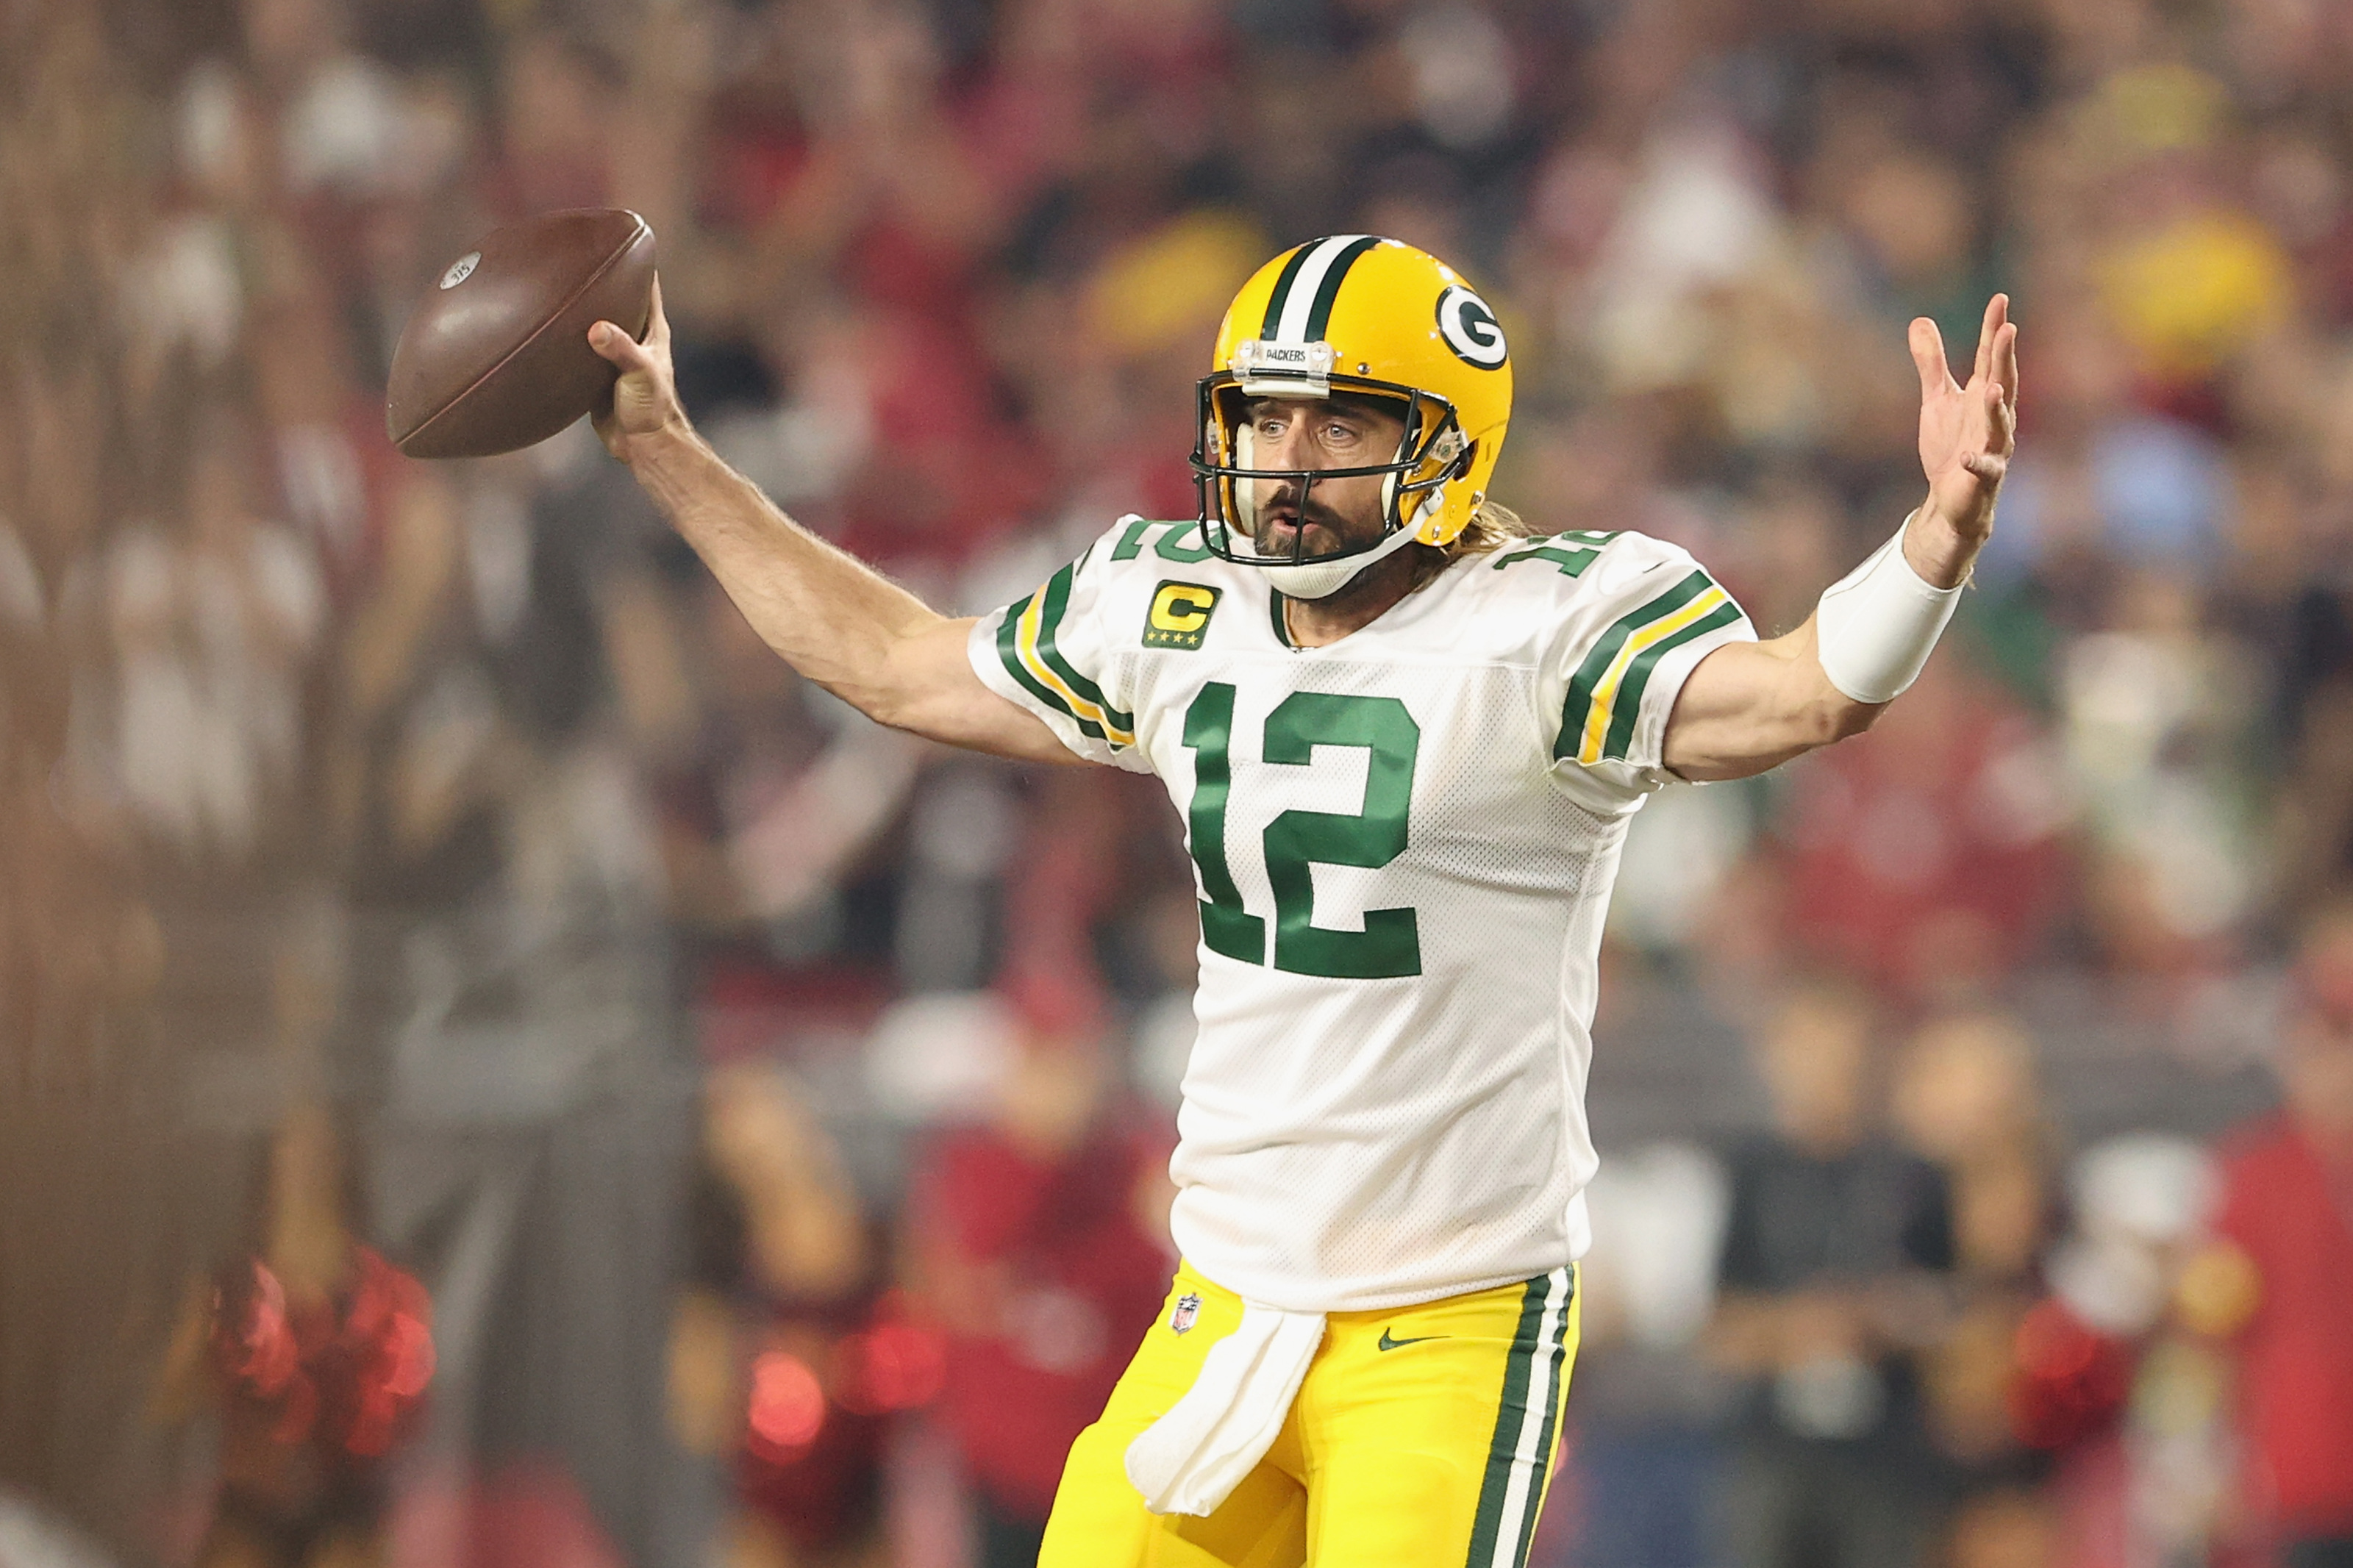 2021 NFL Power Rankings: Packers take top spot, Browns in a tail spin